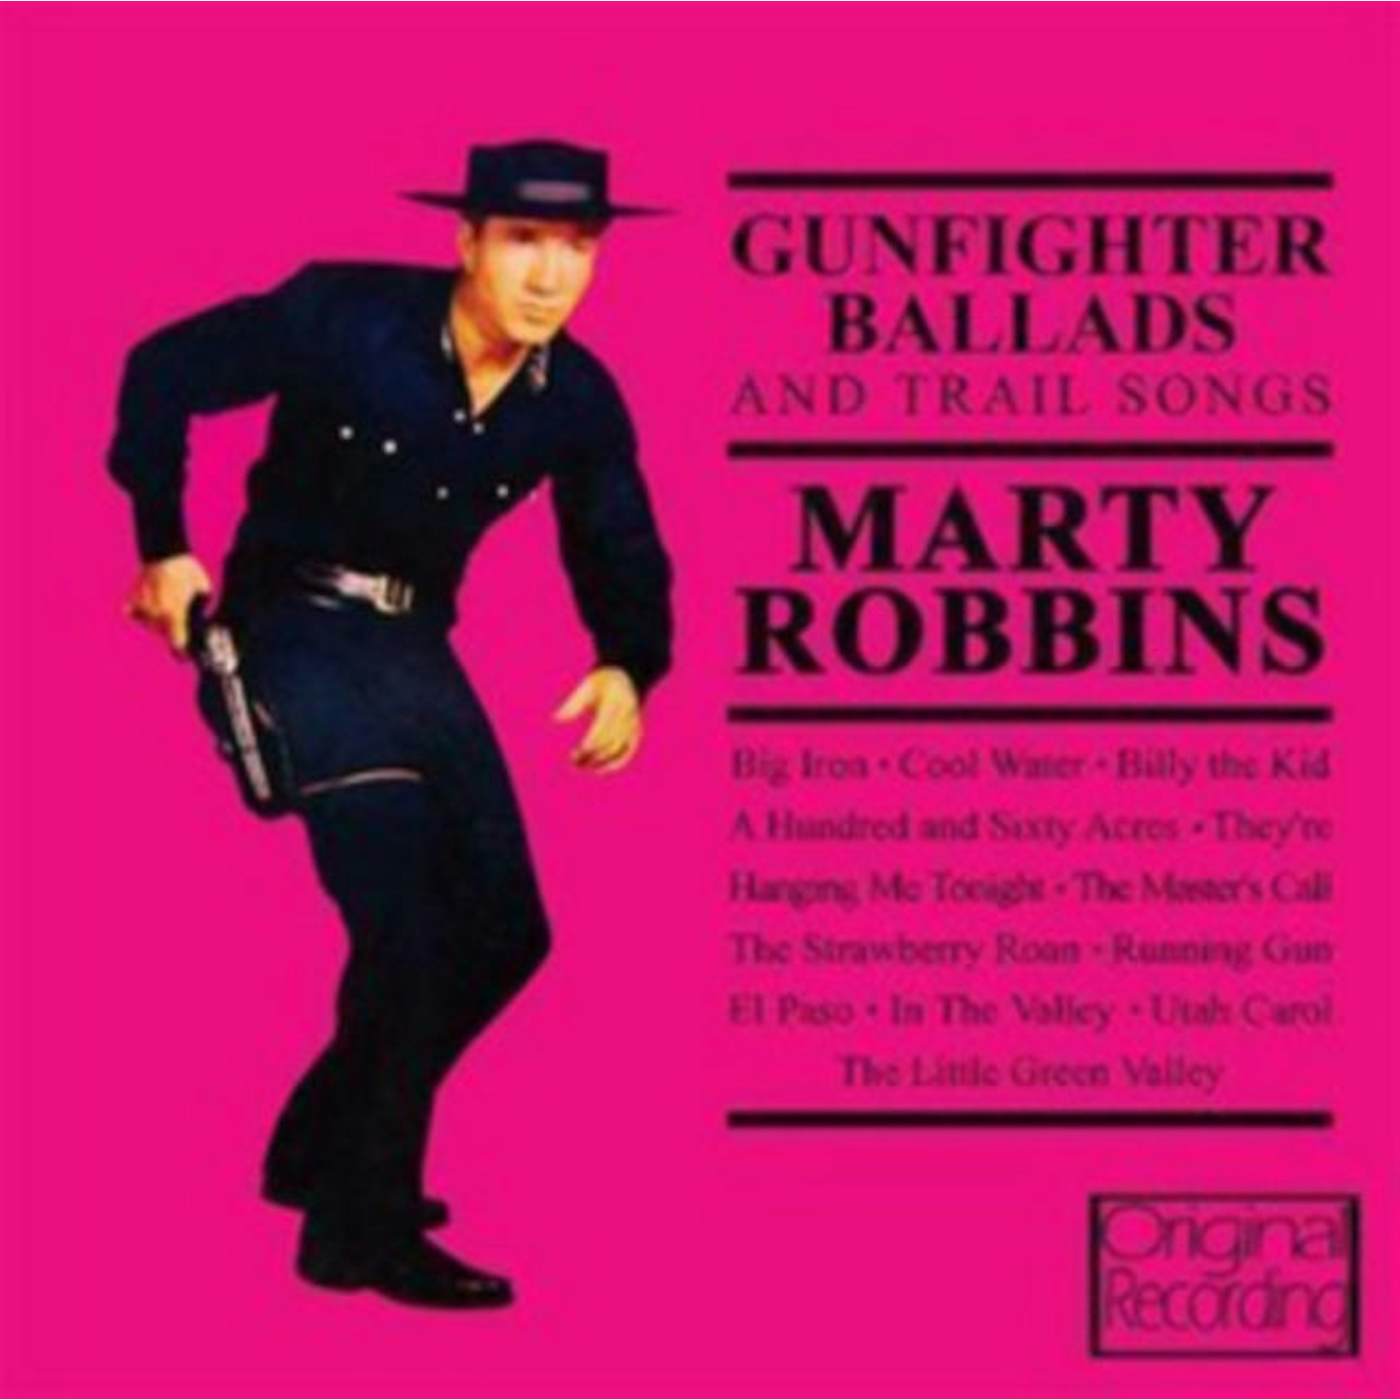 Marty Robbins CD - Gunfighter Ballads And Trail Songs